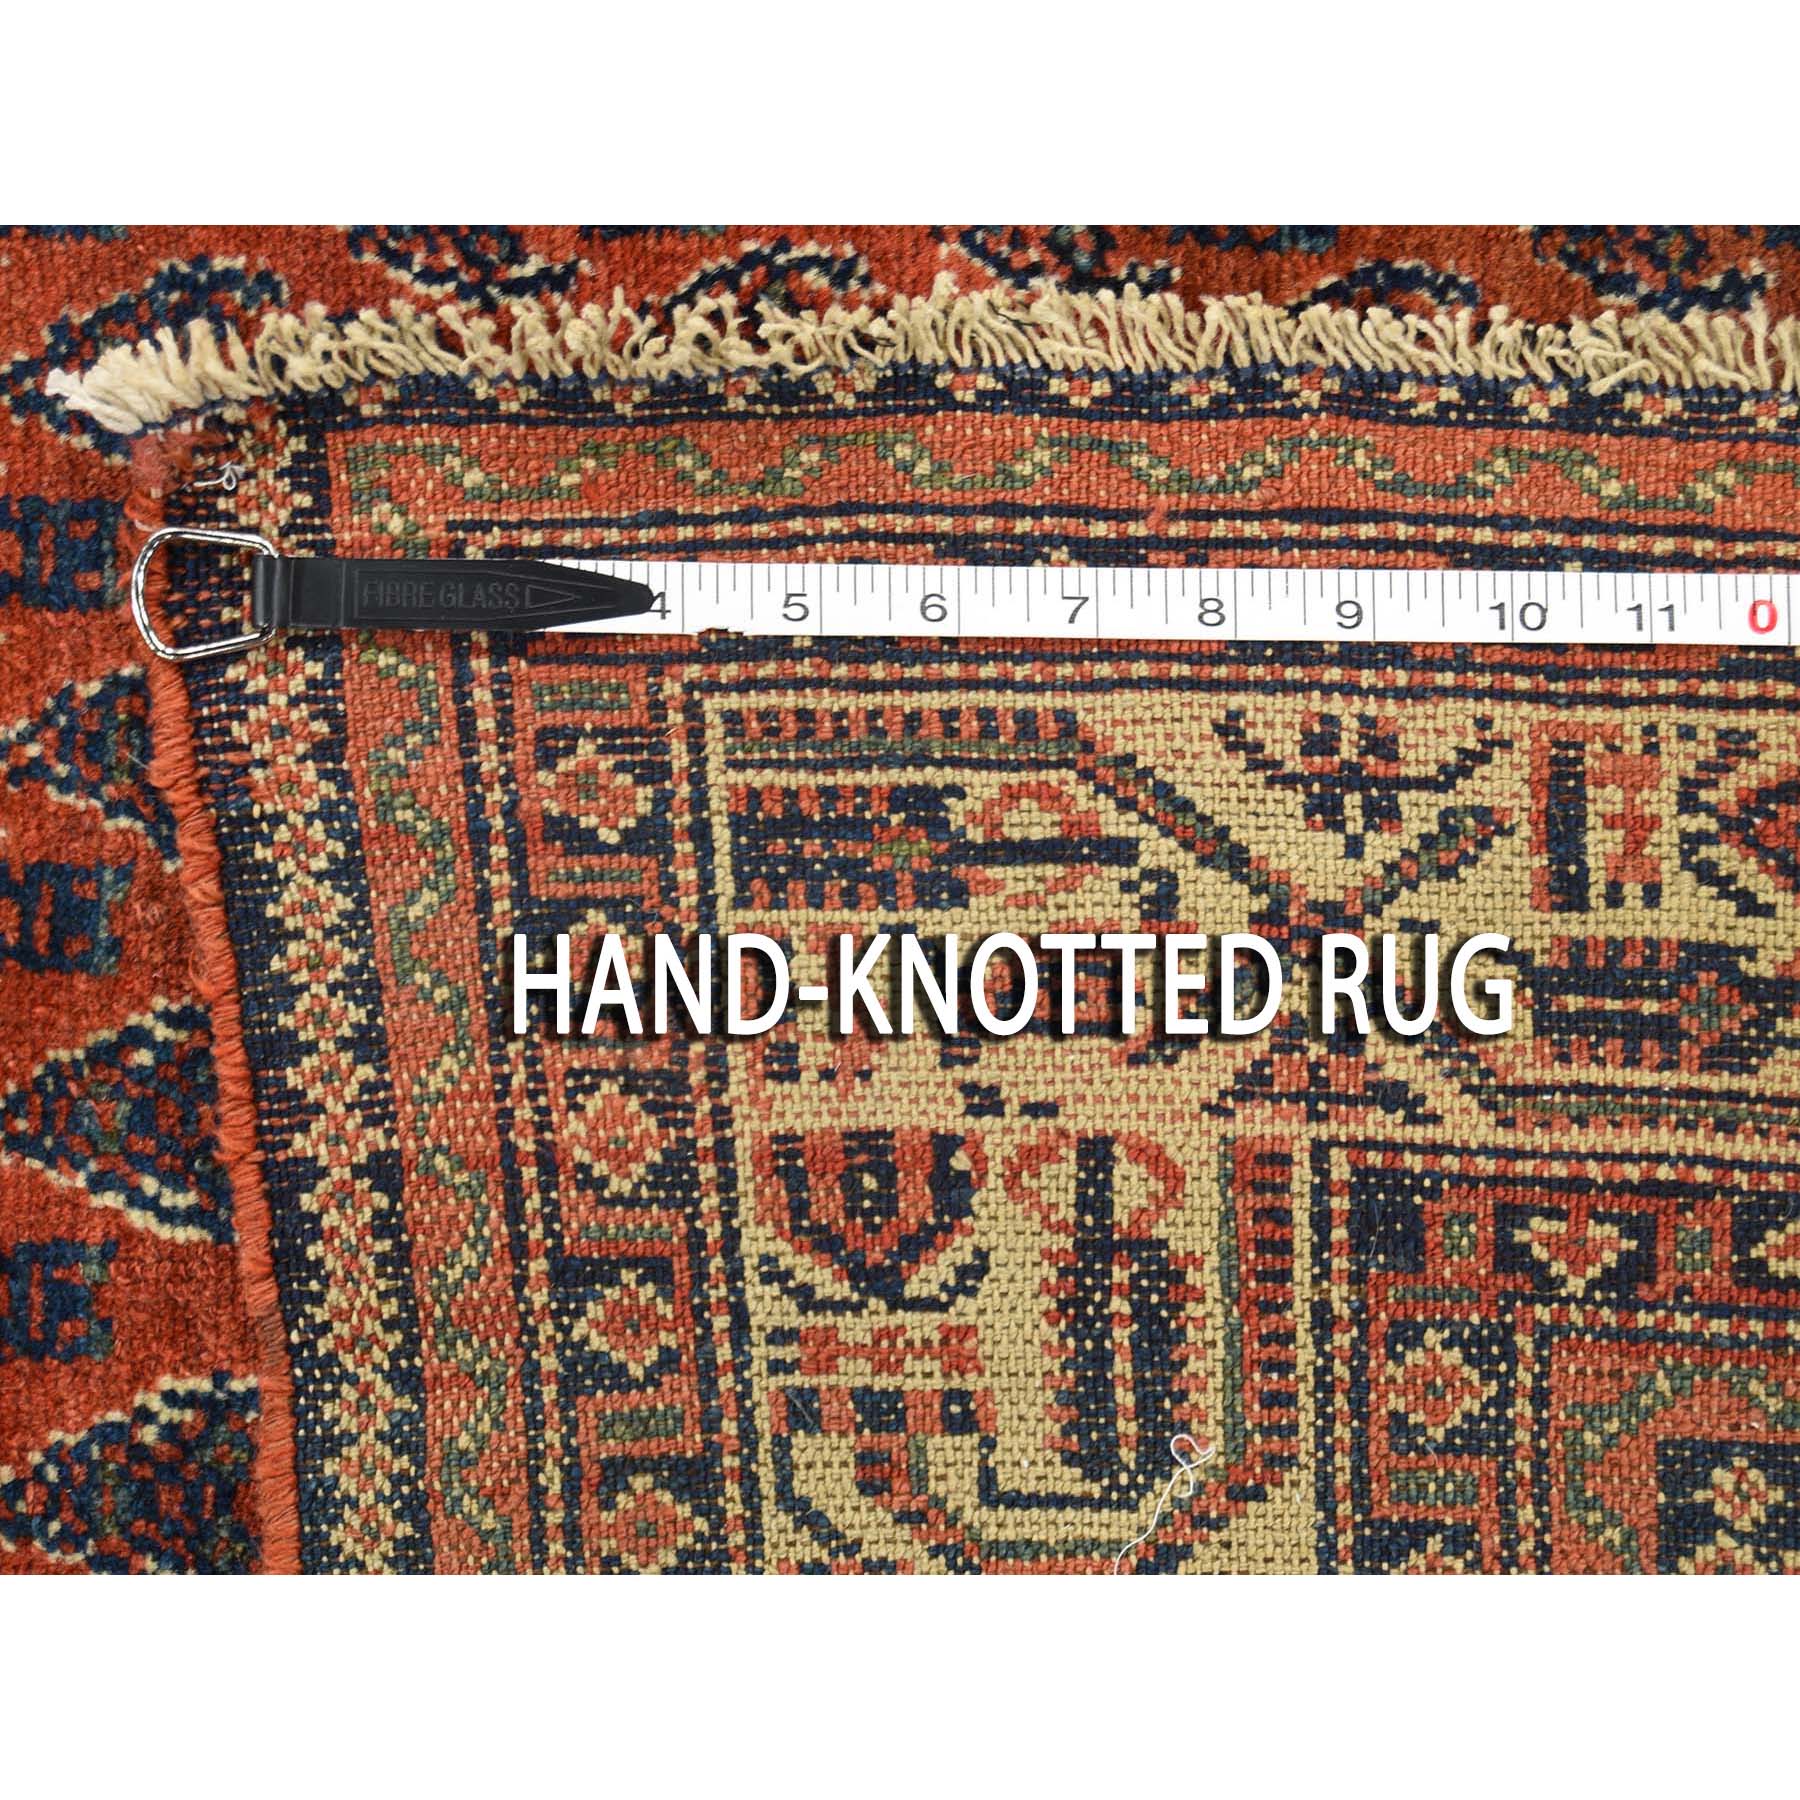 4-5 x6-5  Antique Persian Seraband Good Condition Even Wear Pure Wool Hand-Knotted Oriental Rug 